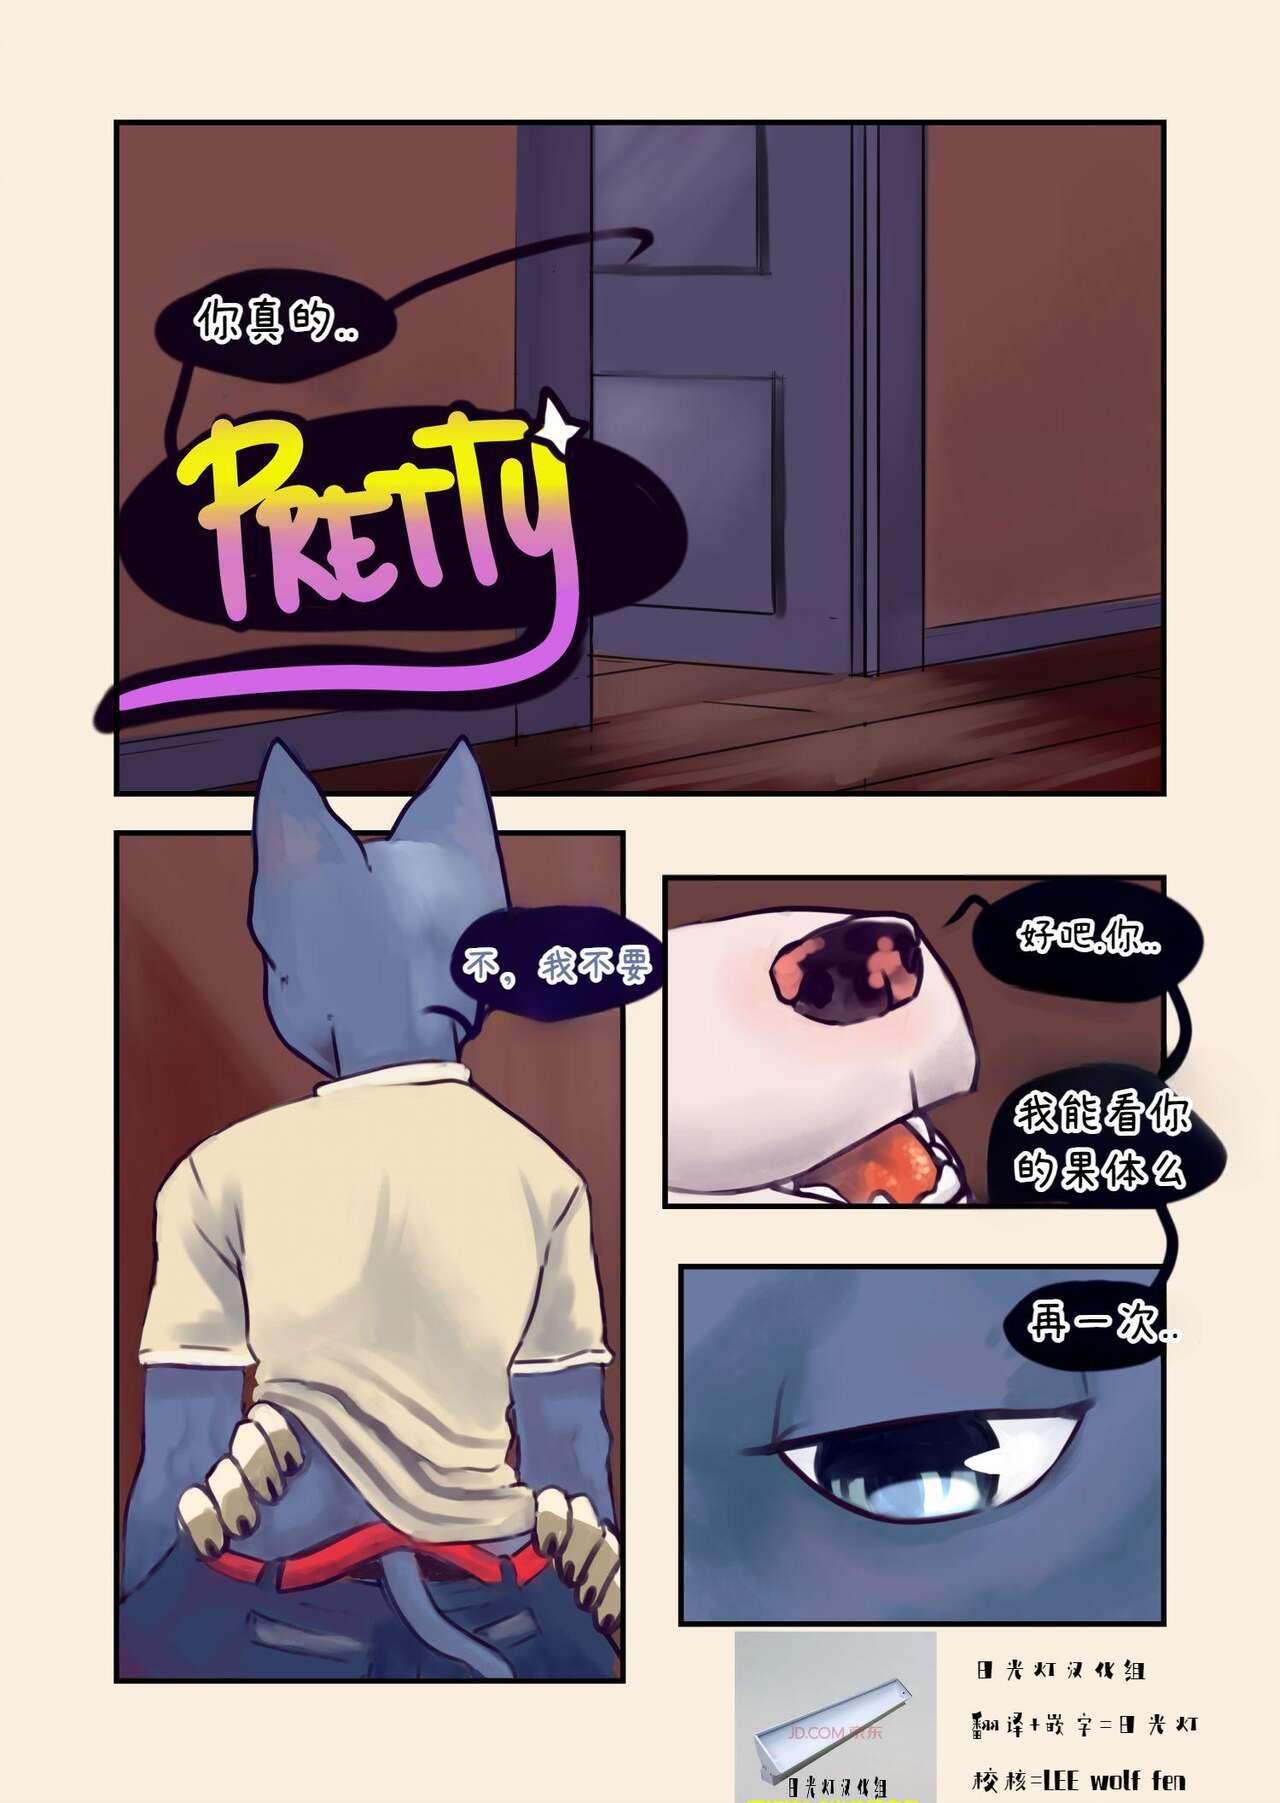 [Bastriw] Pretty - Chapter 1日光灯汉化(Chinese) 